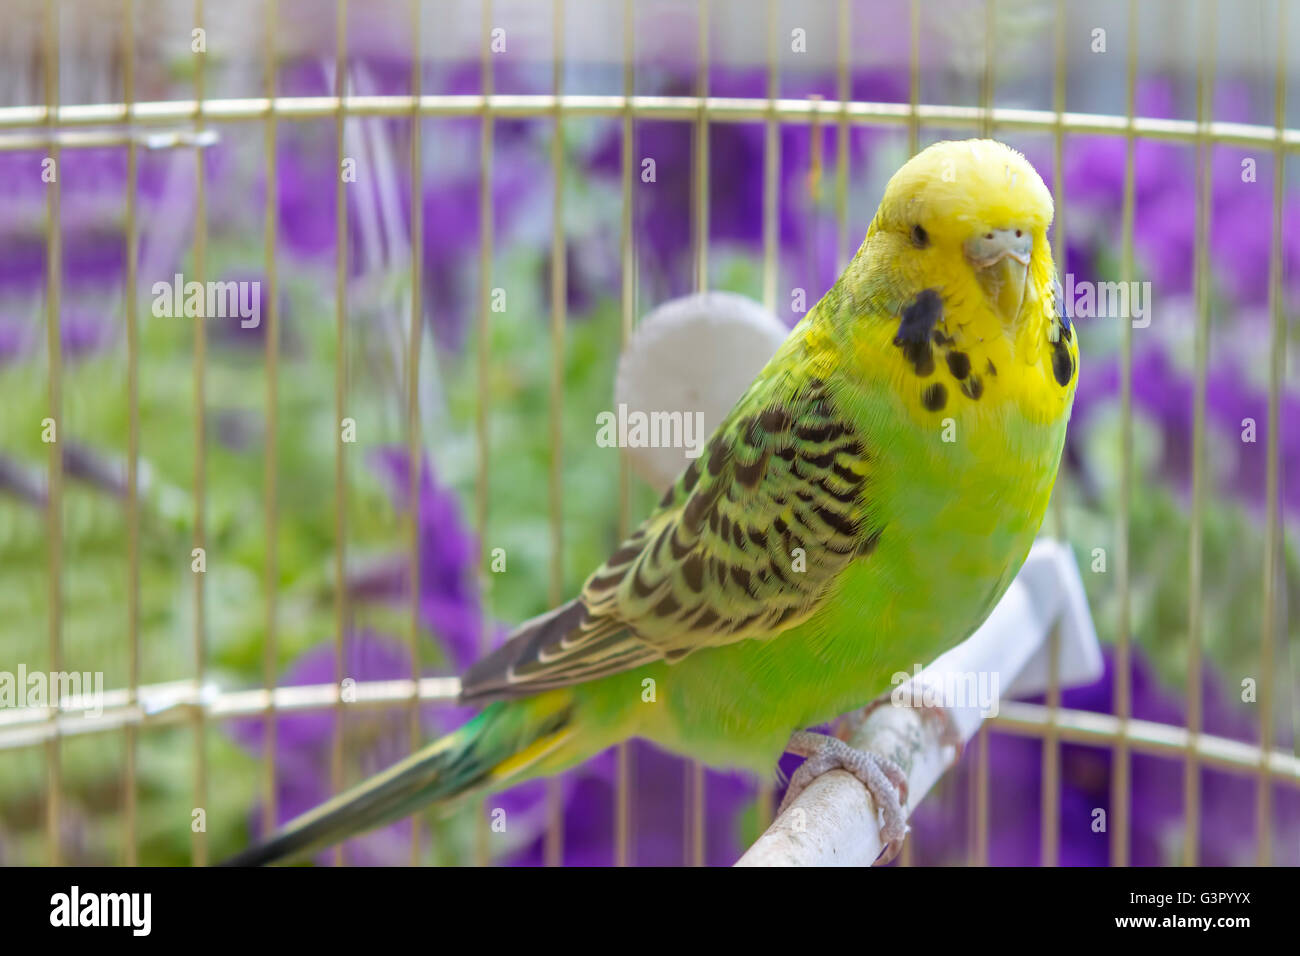 green wavy parrot sits in a cage Stock Photo